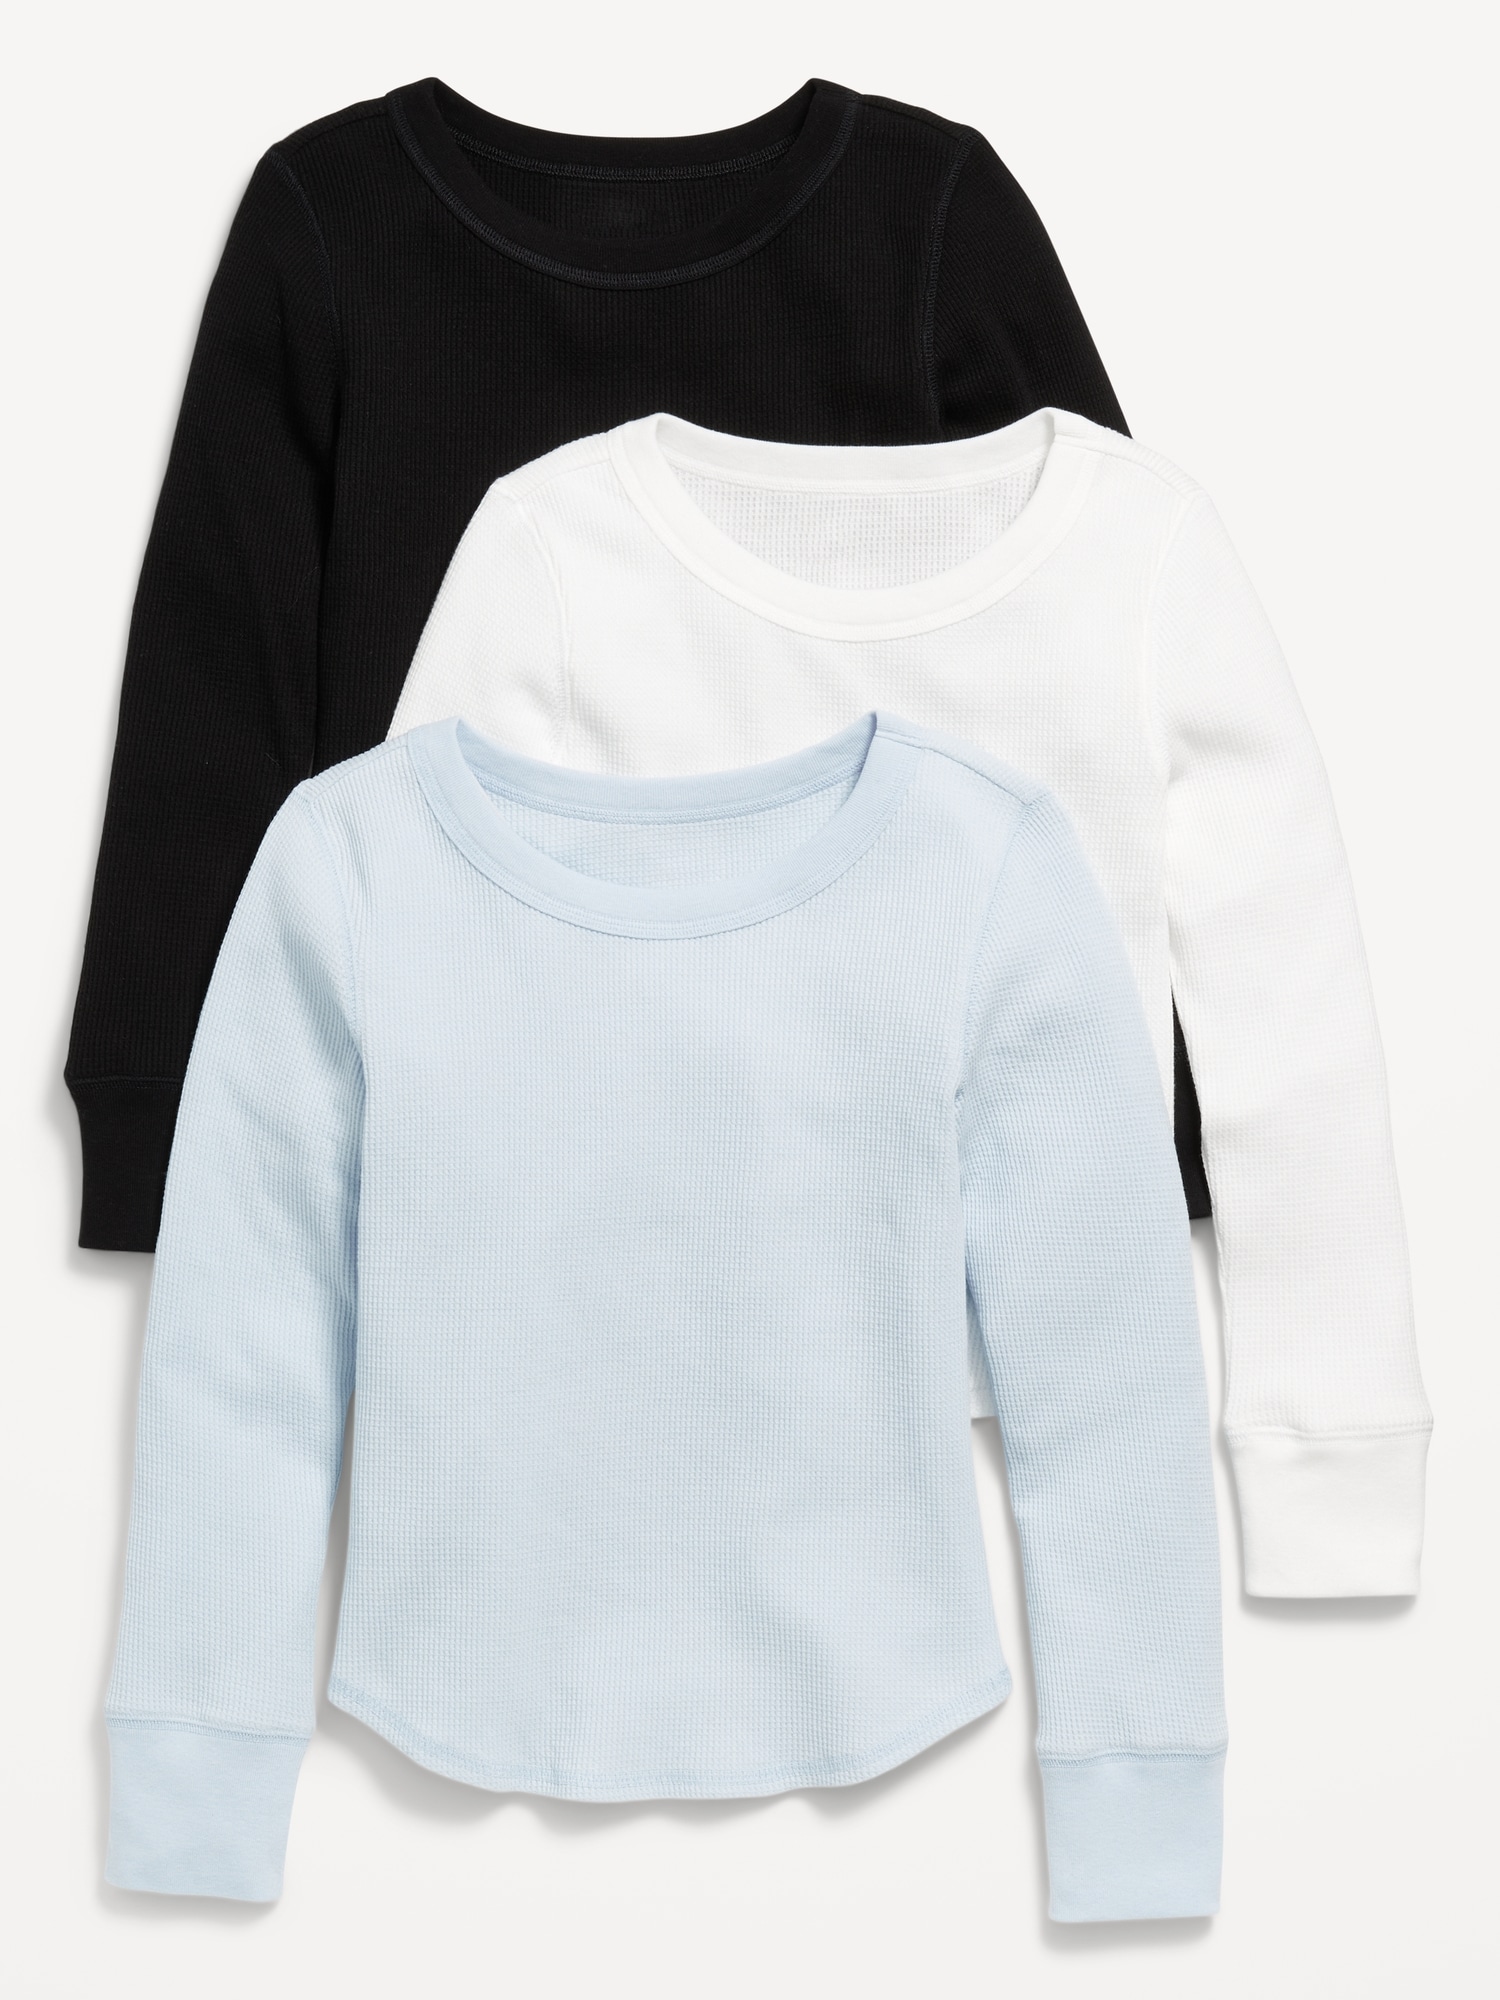 Long-Sleeve Thermal-Knit T-Shirt 3-Pack for Girls